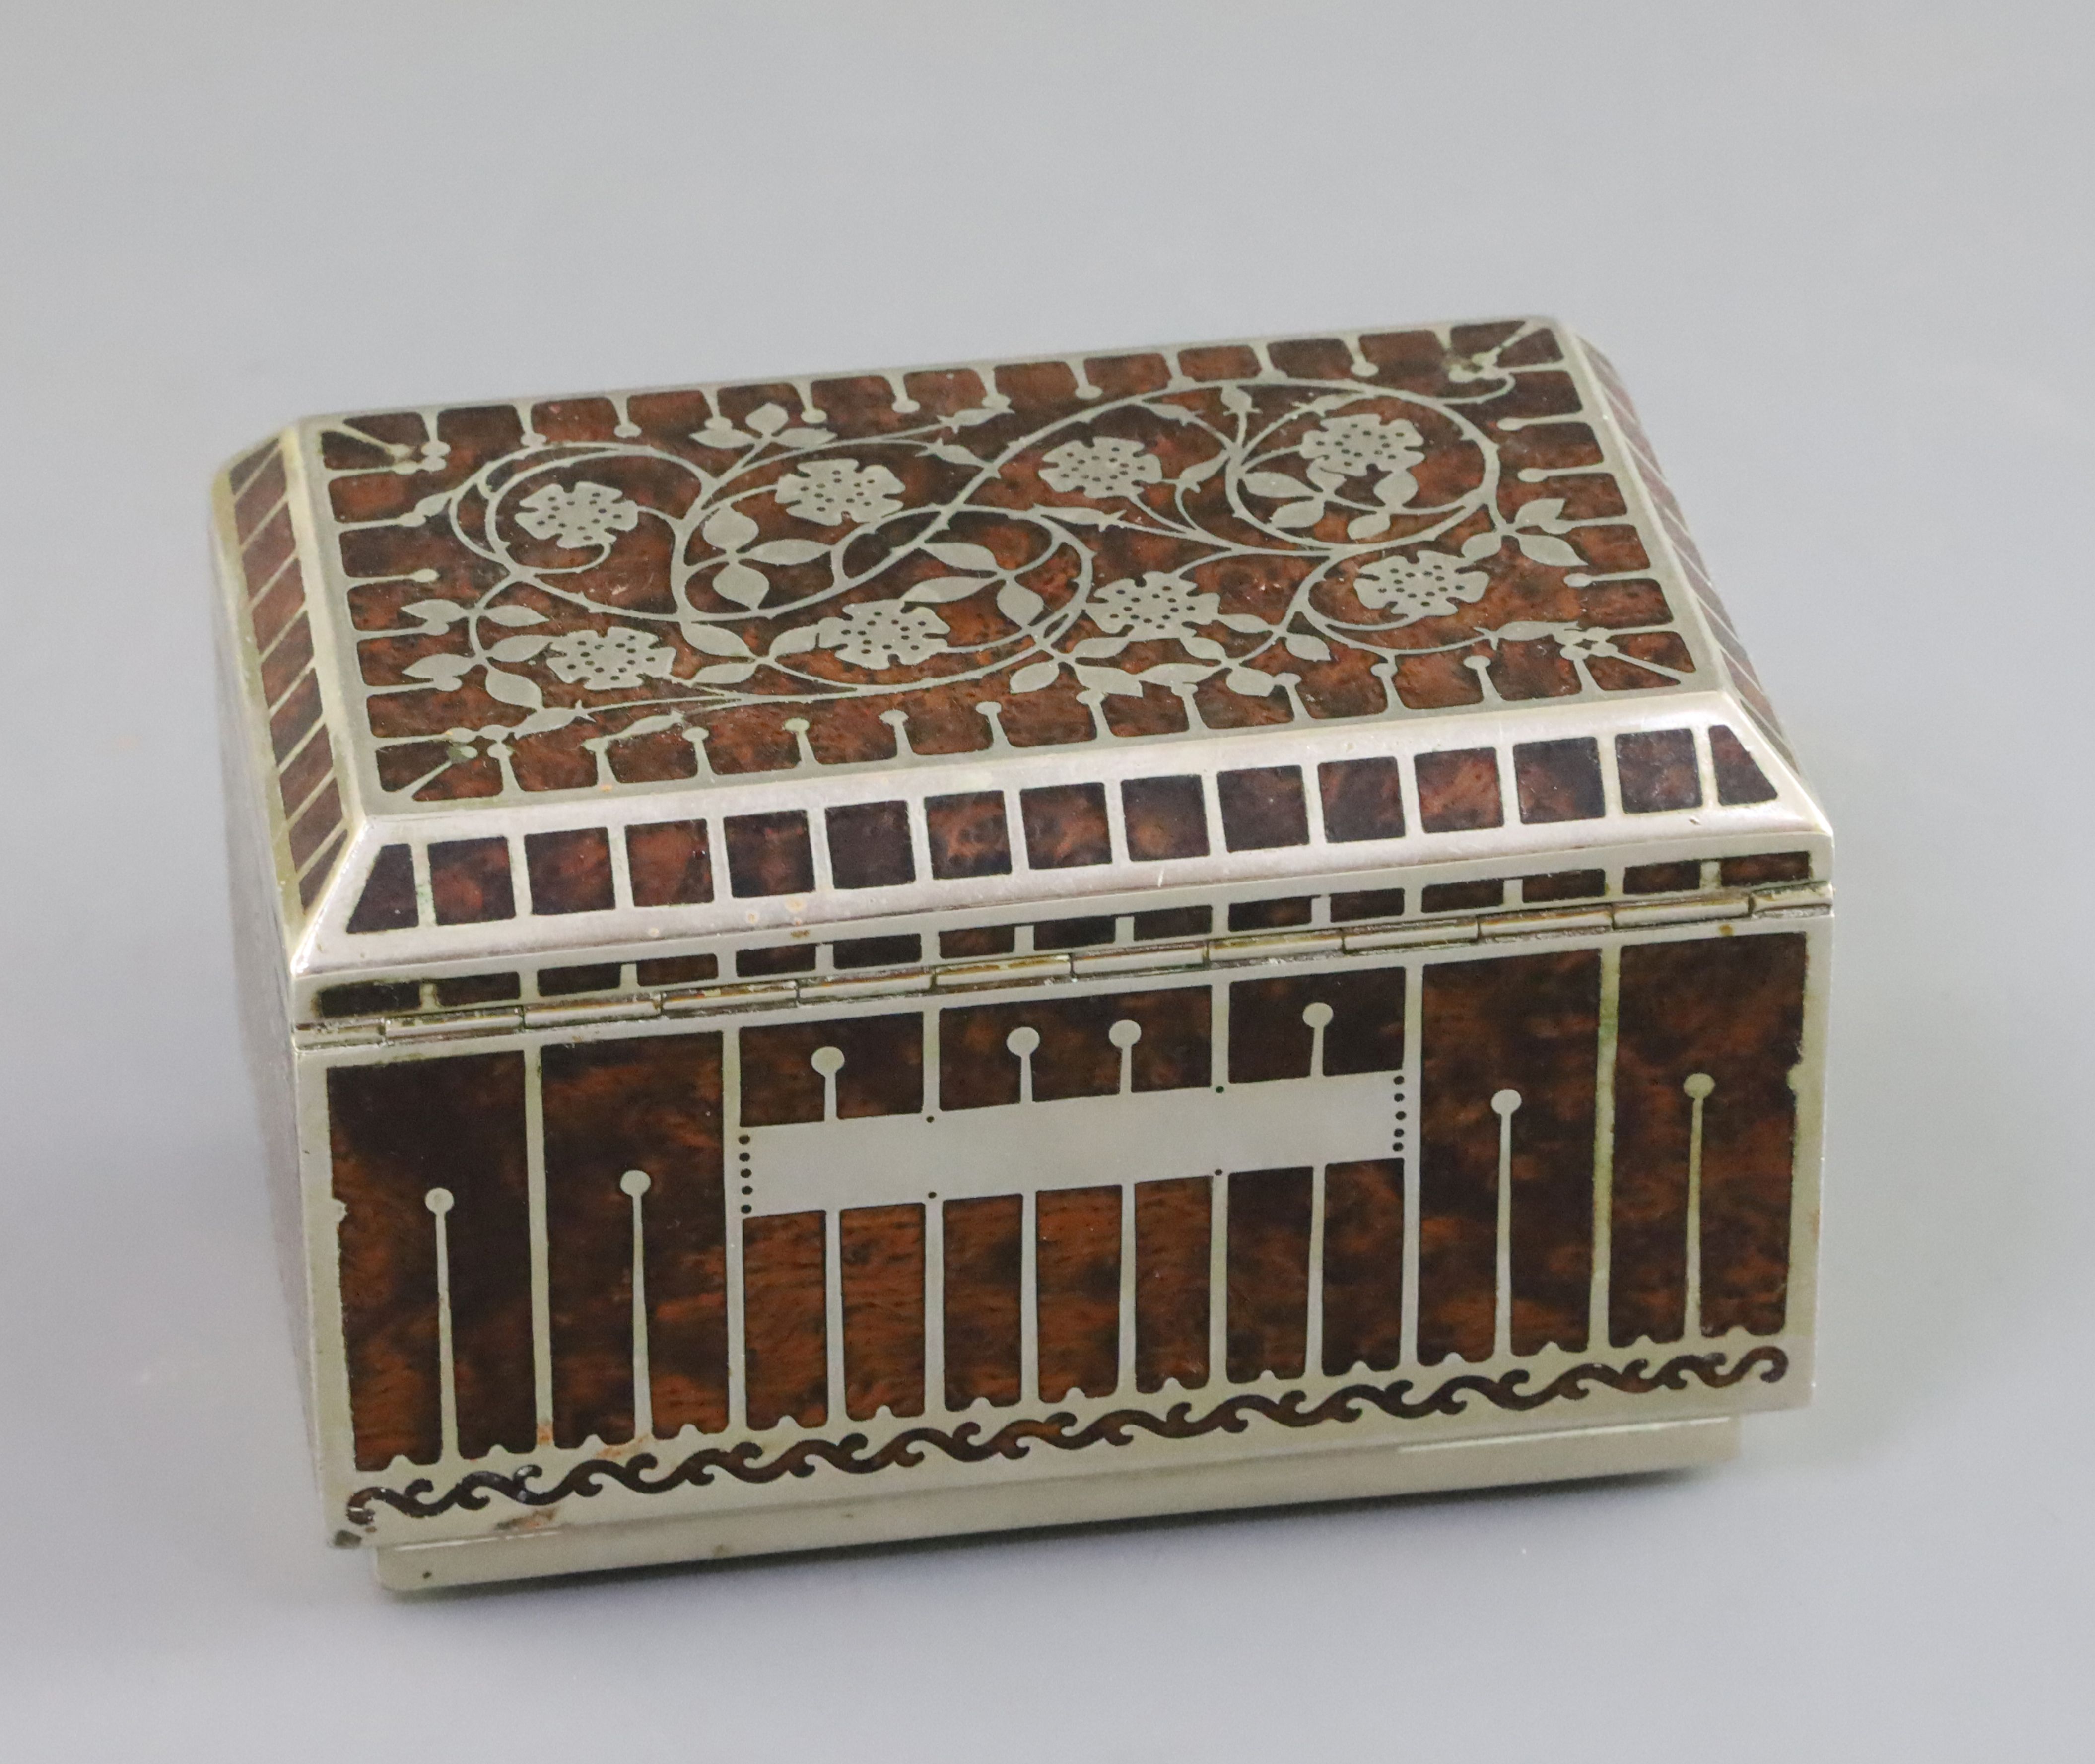 An Erhard and Sohne silvered metal and burr wood casket, decorated with dog roses, 5in., with key - Image 2 of 2